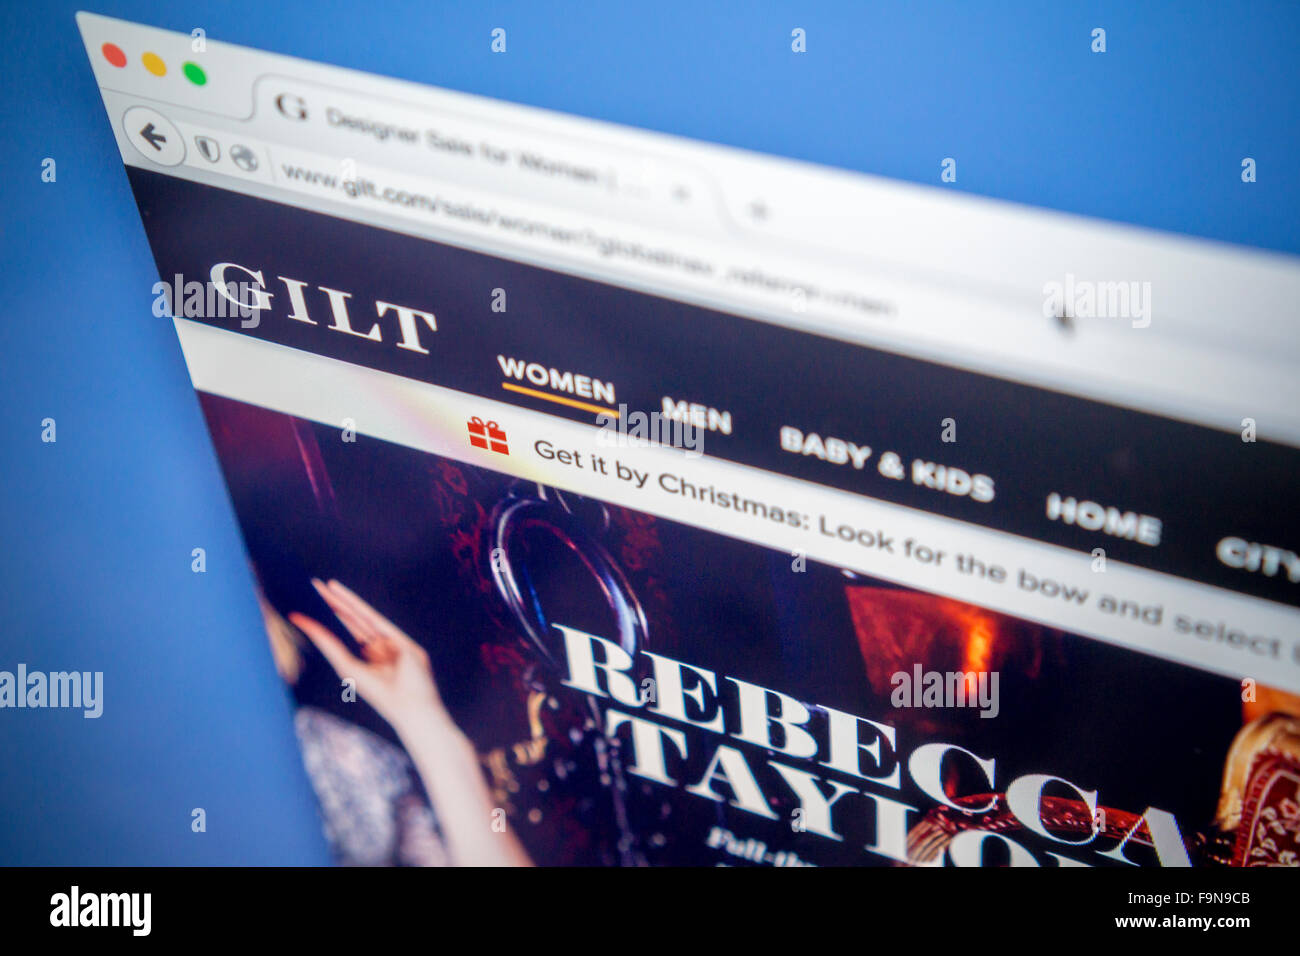 The ecommerce website of the Gilt Groupe is seen on a computer on Tuesday, December 15, 2015. The Hudson's Bay Company is reported to be in talks to buy the Gilt Groupe in a $250 million deal. The flash sale site was valued at $1 billion three years ago. The Hudson's Bay Company is the owner of Saks Fifth Avenue and Lord & Taylor. (© Richard B. Levine) Stock Photo